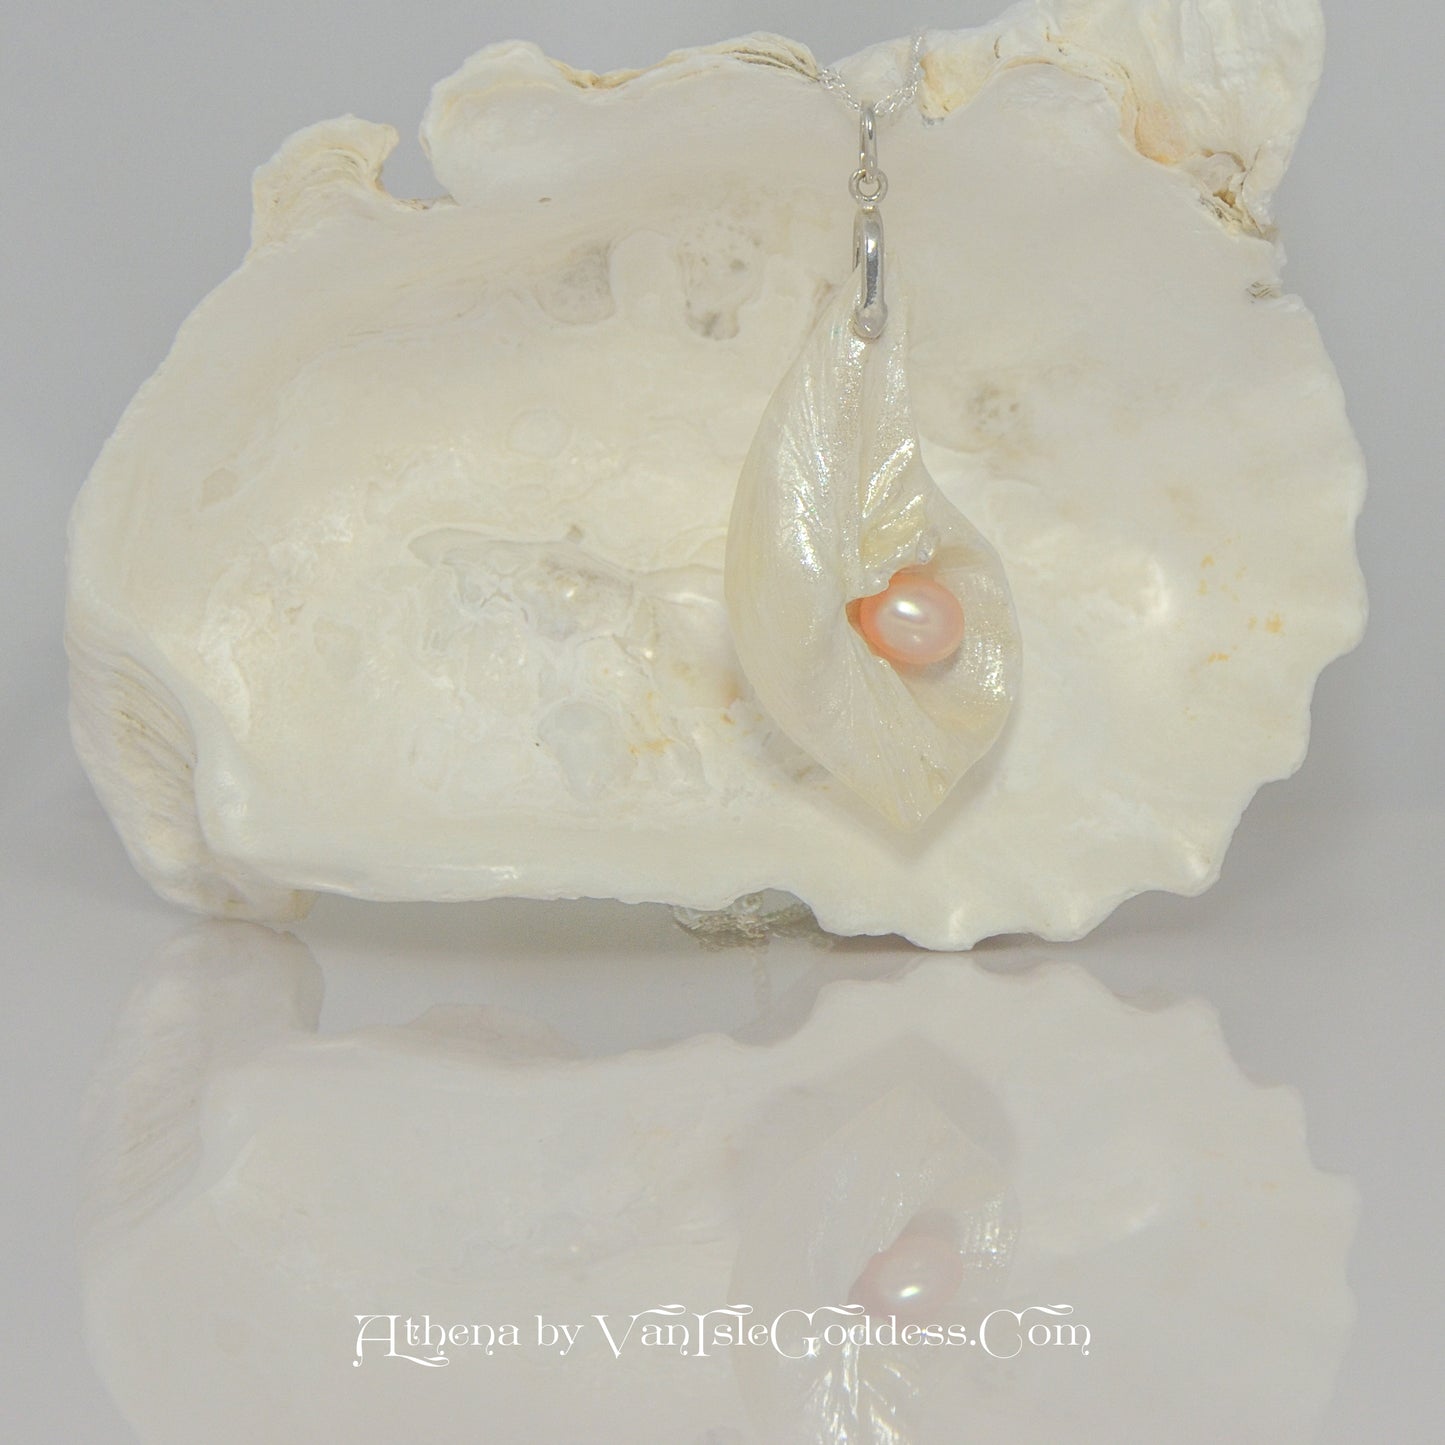 Athena is the name of the pendant being showcased.  It is a natural seashell from the beaches of Vancouver Island. The pendant has a real pink freshwater pearl and a faceted herkimer diamond. The pendant is hanging on a large seashell to show how the pendant will hang.